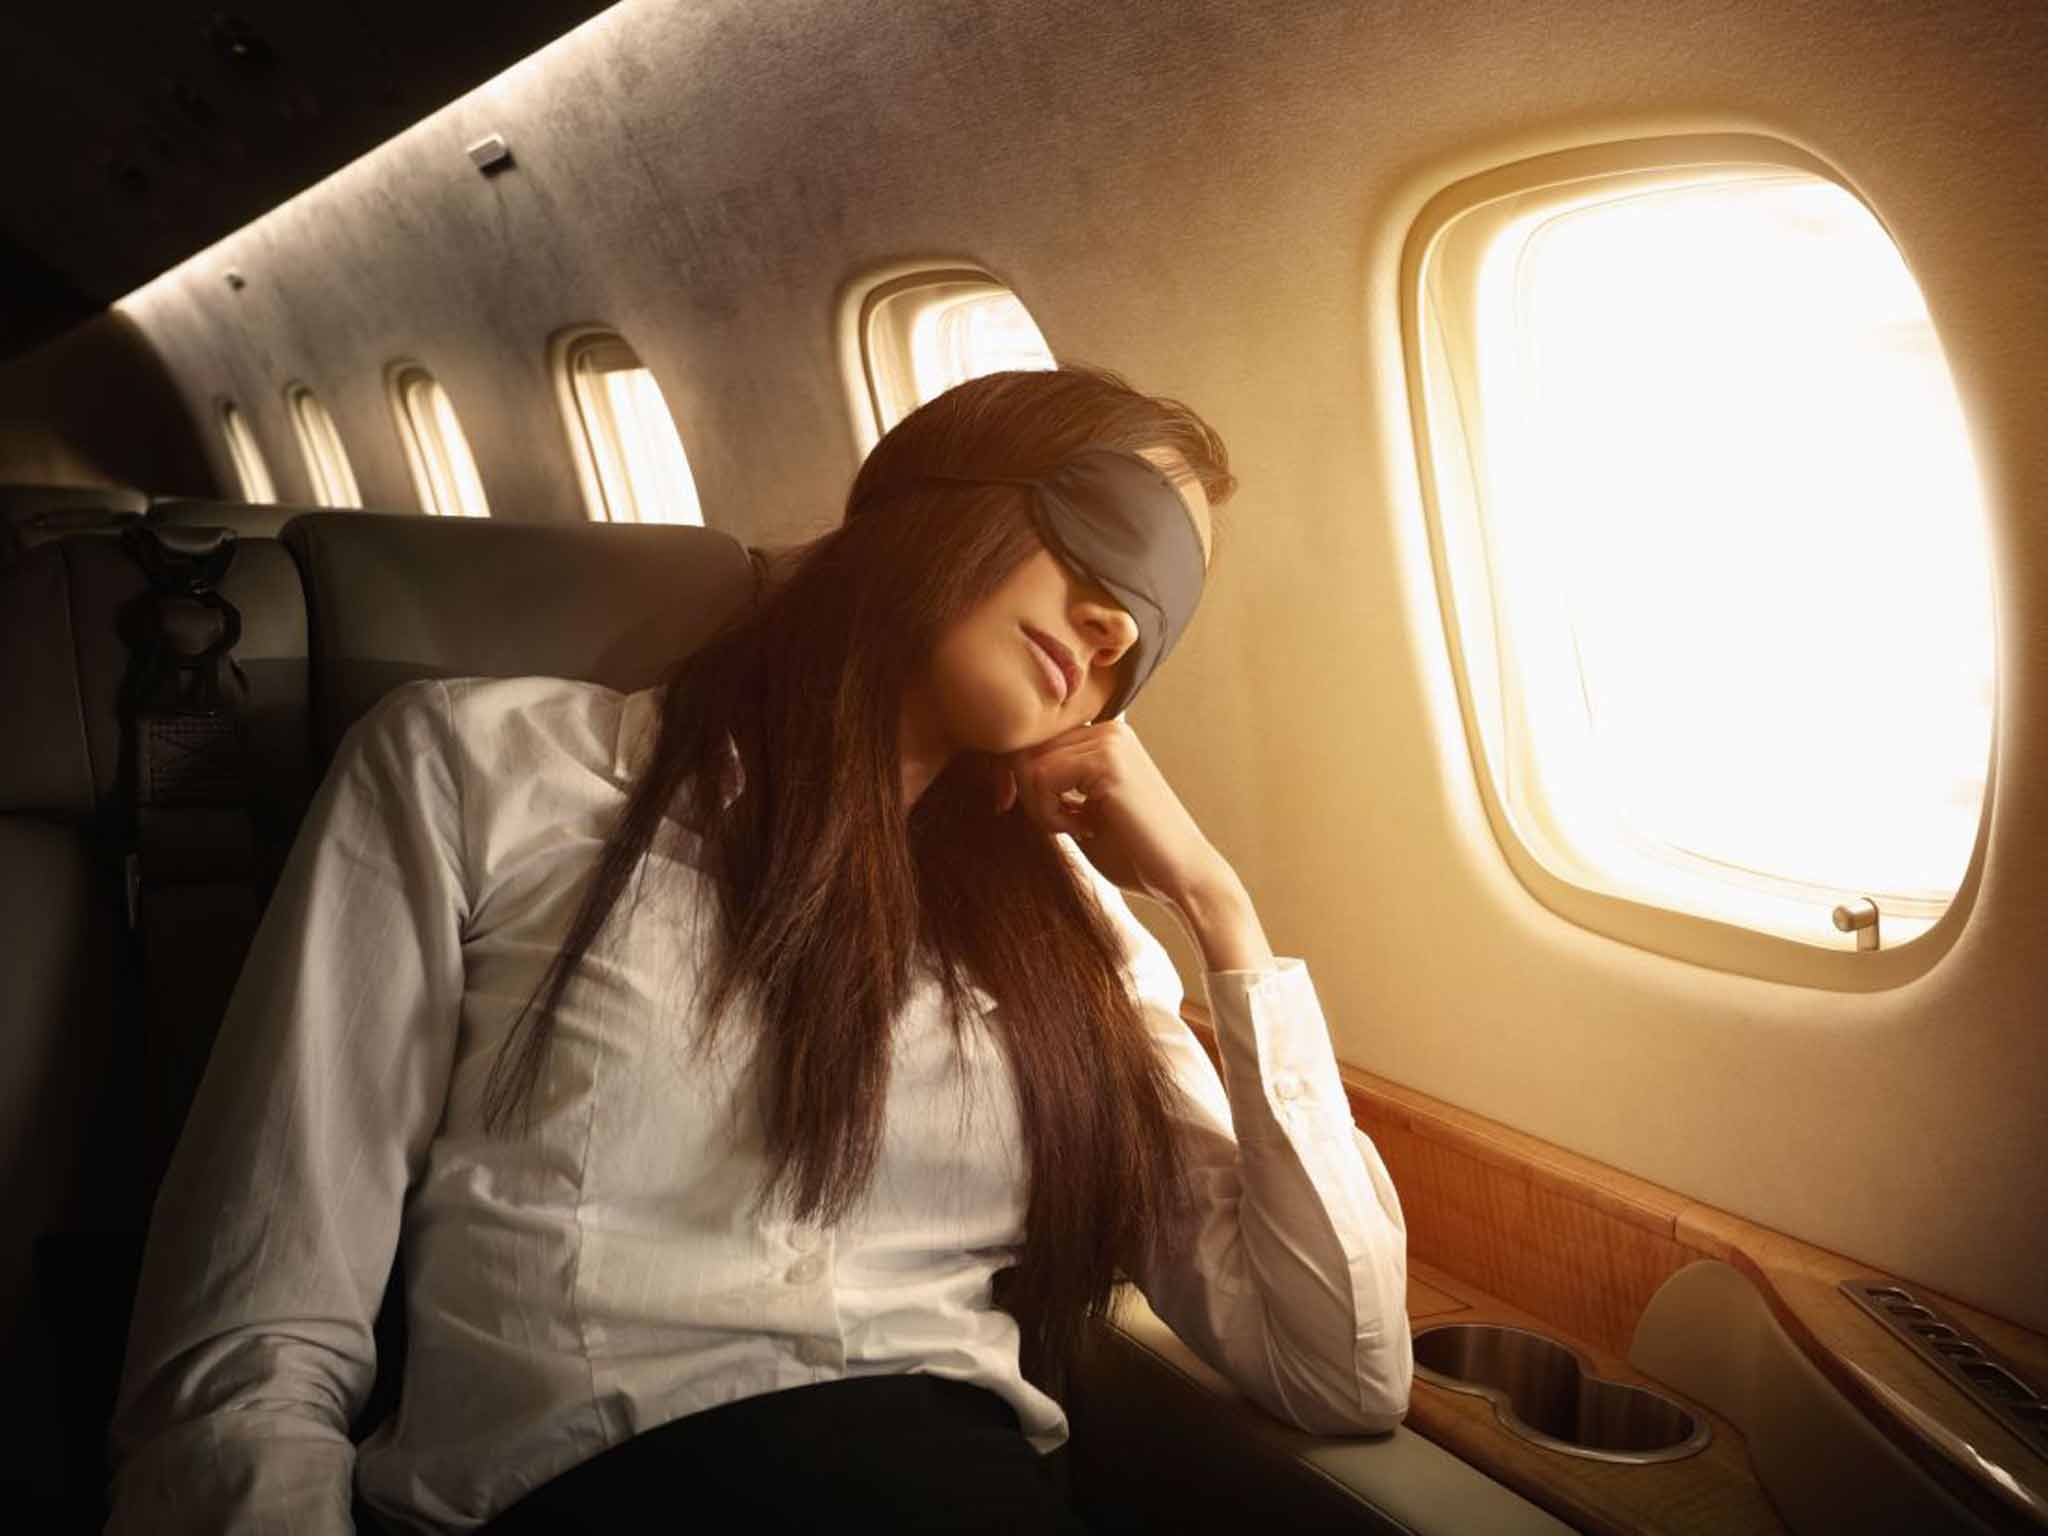 More than eight in 10 have struggled with severe fatigue after a long-haul flight, according to new study